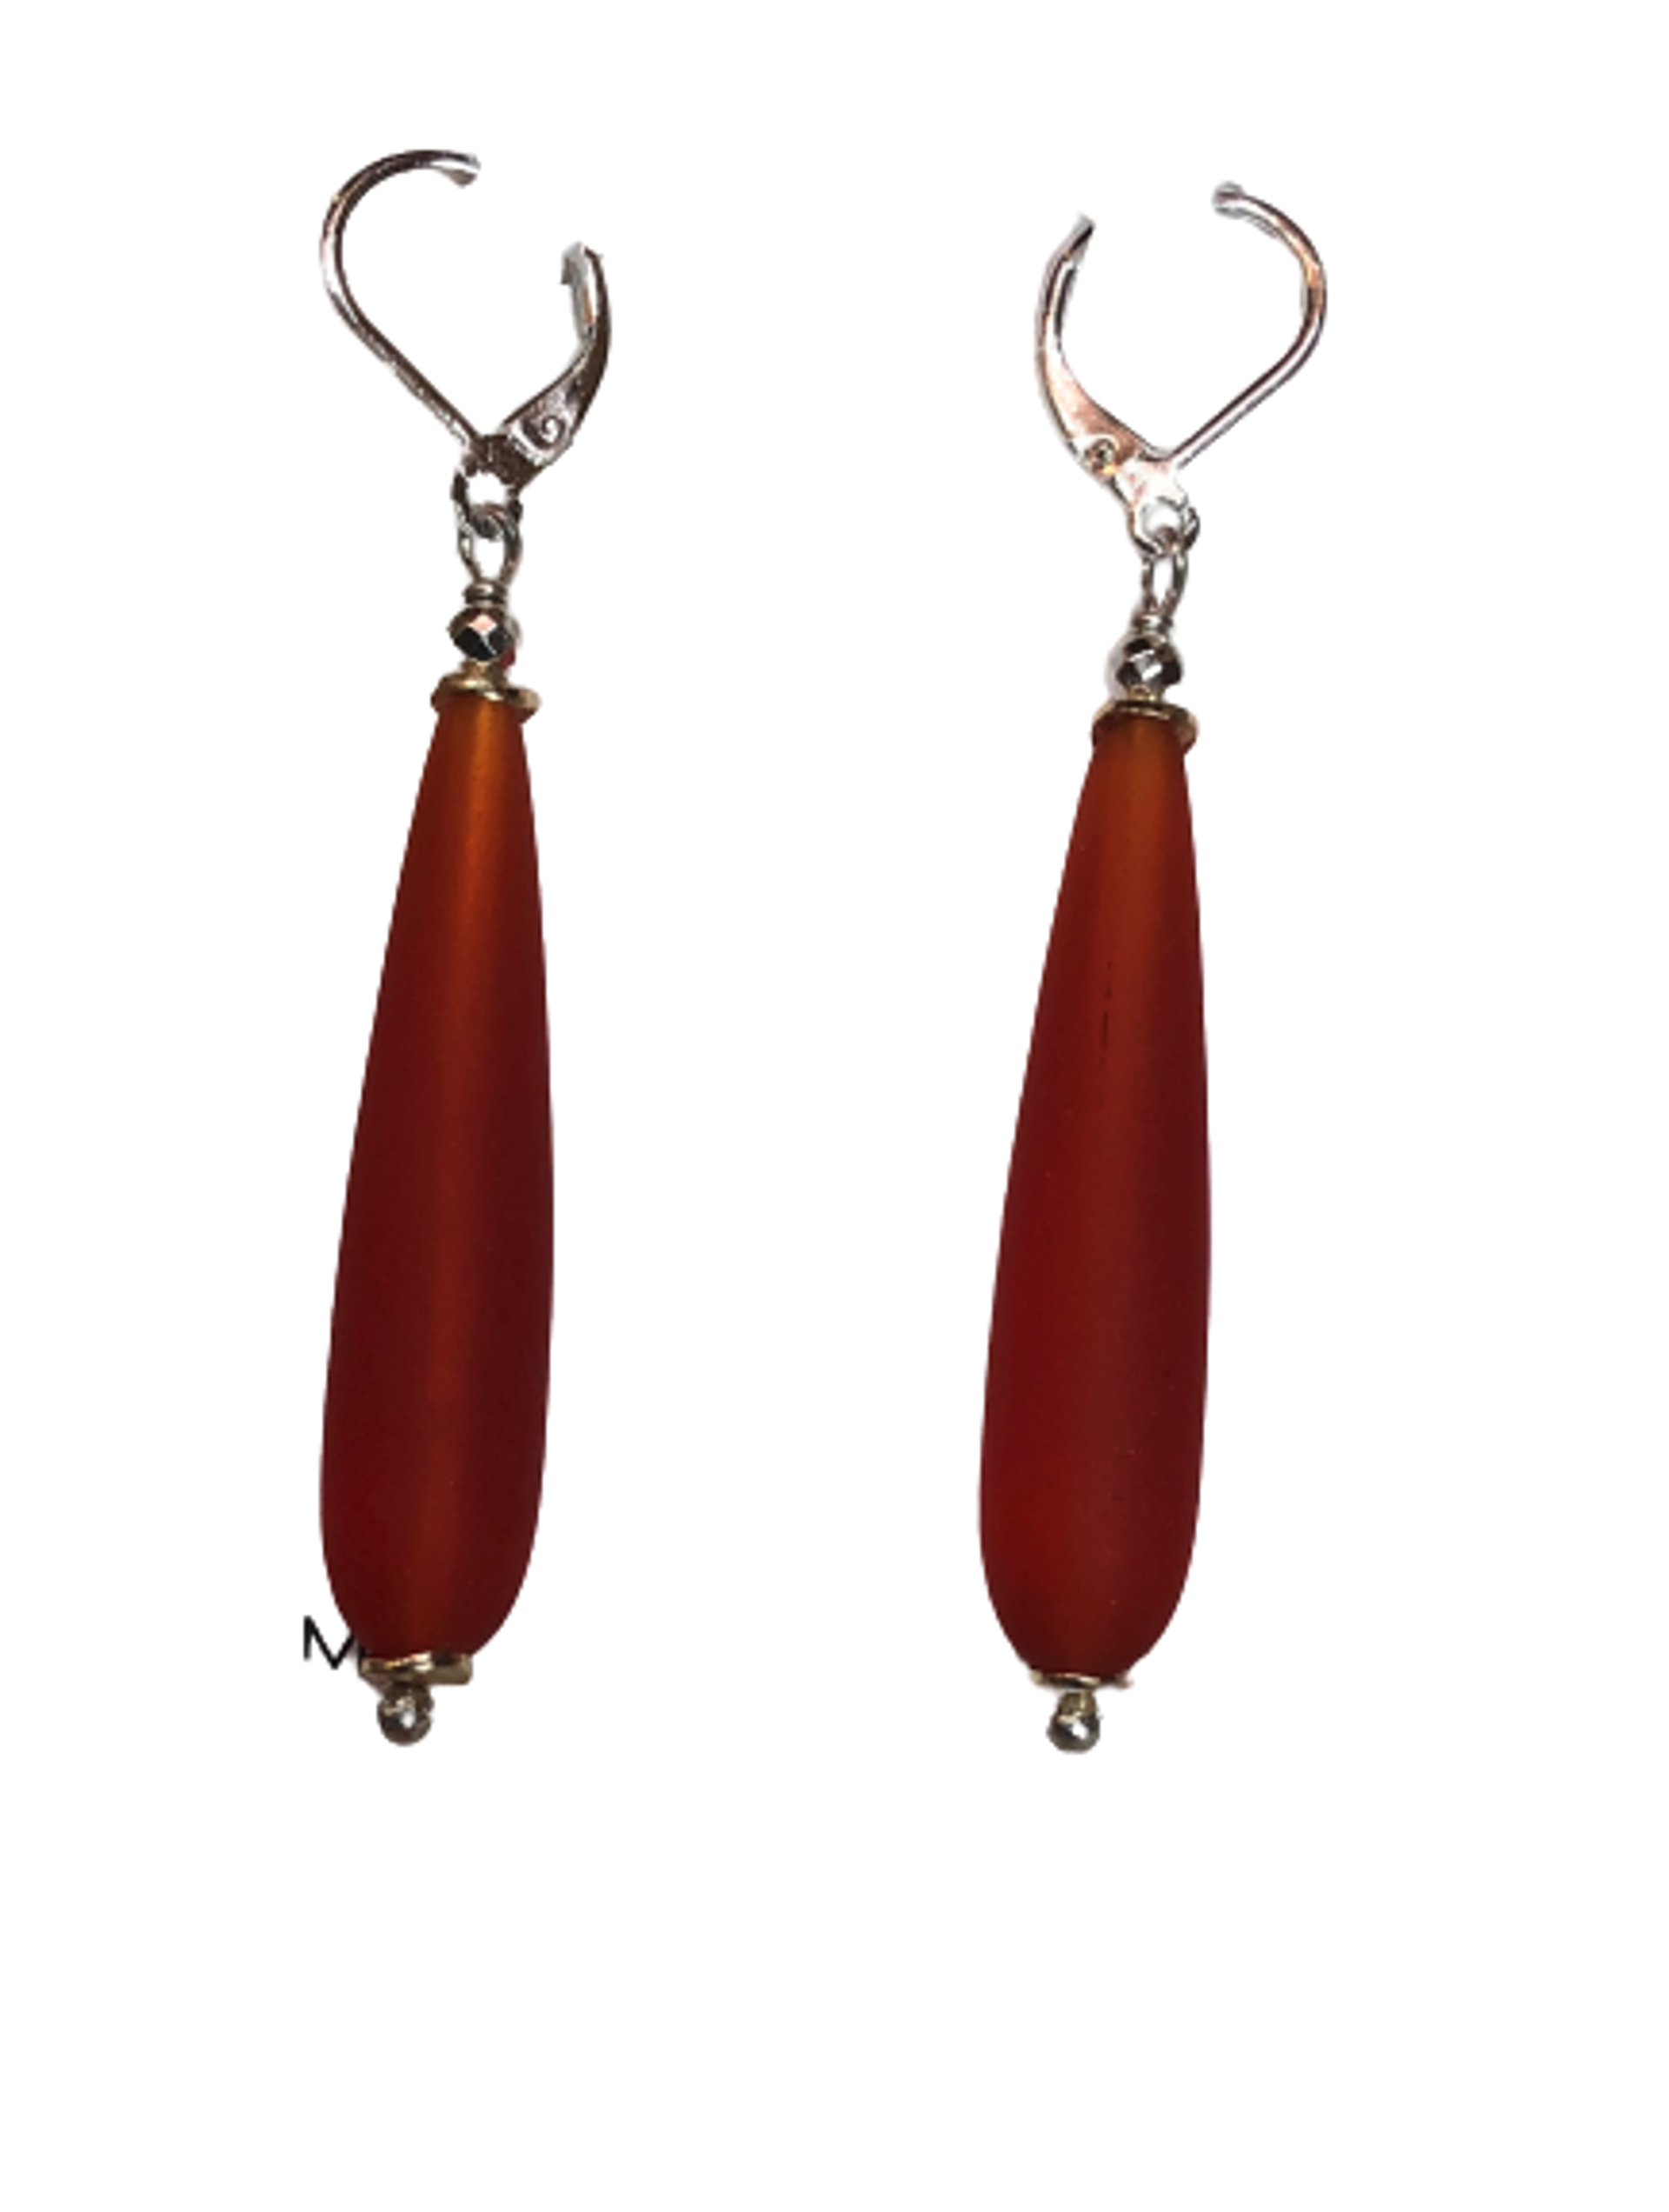 Earrings - Frosted Me Orange - Frosted glass long drops 1.5 " -ombre orange on sterling silver lever backs by Melissa Rogers